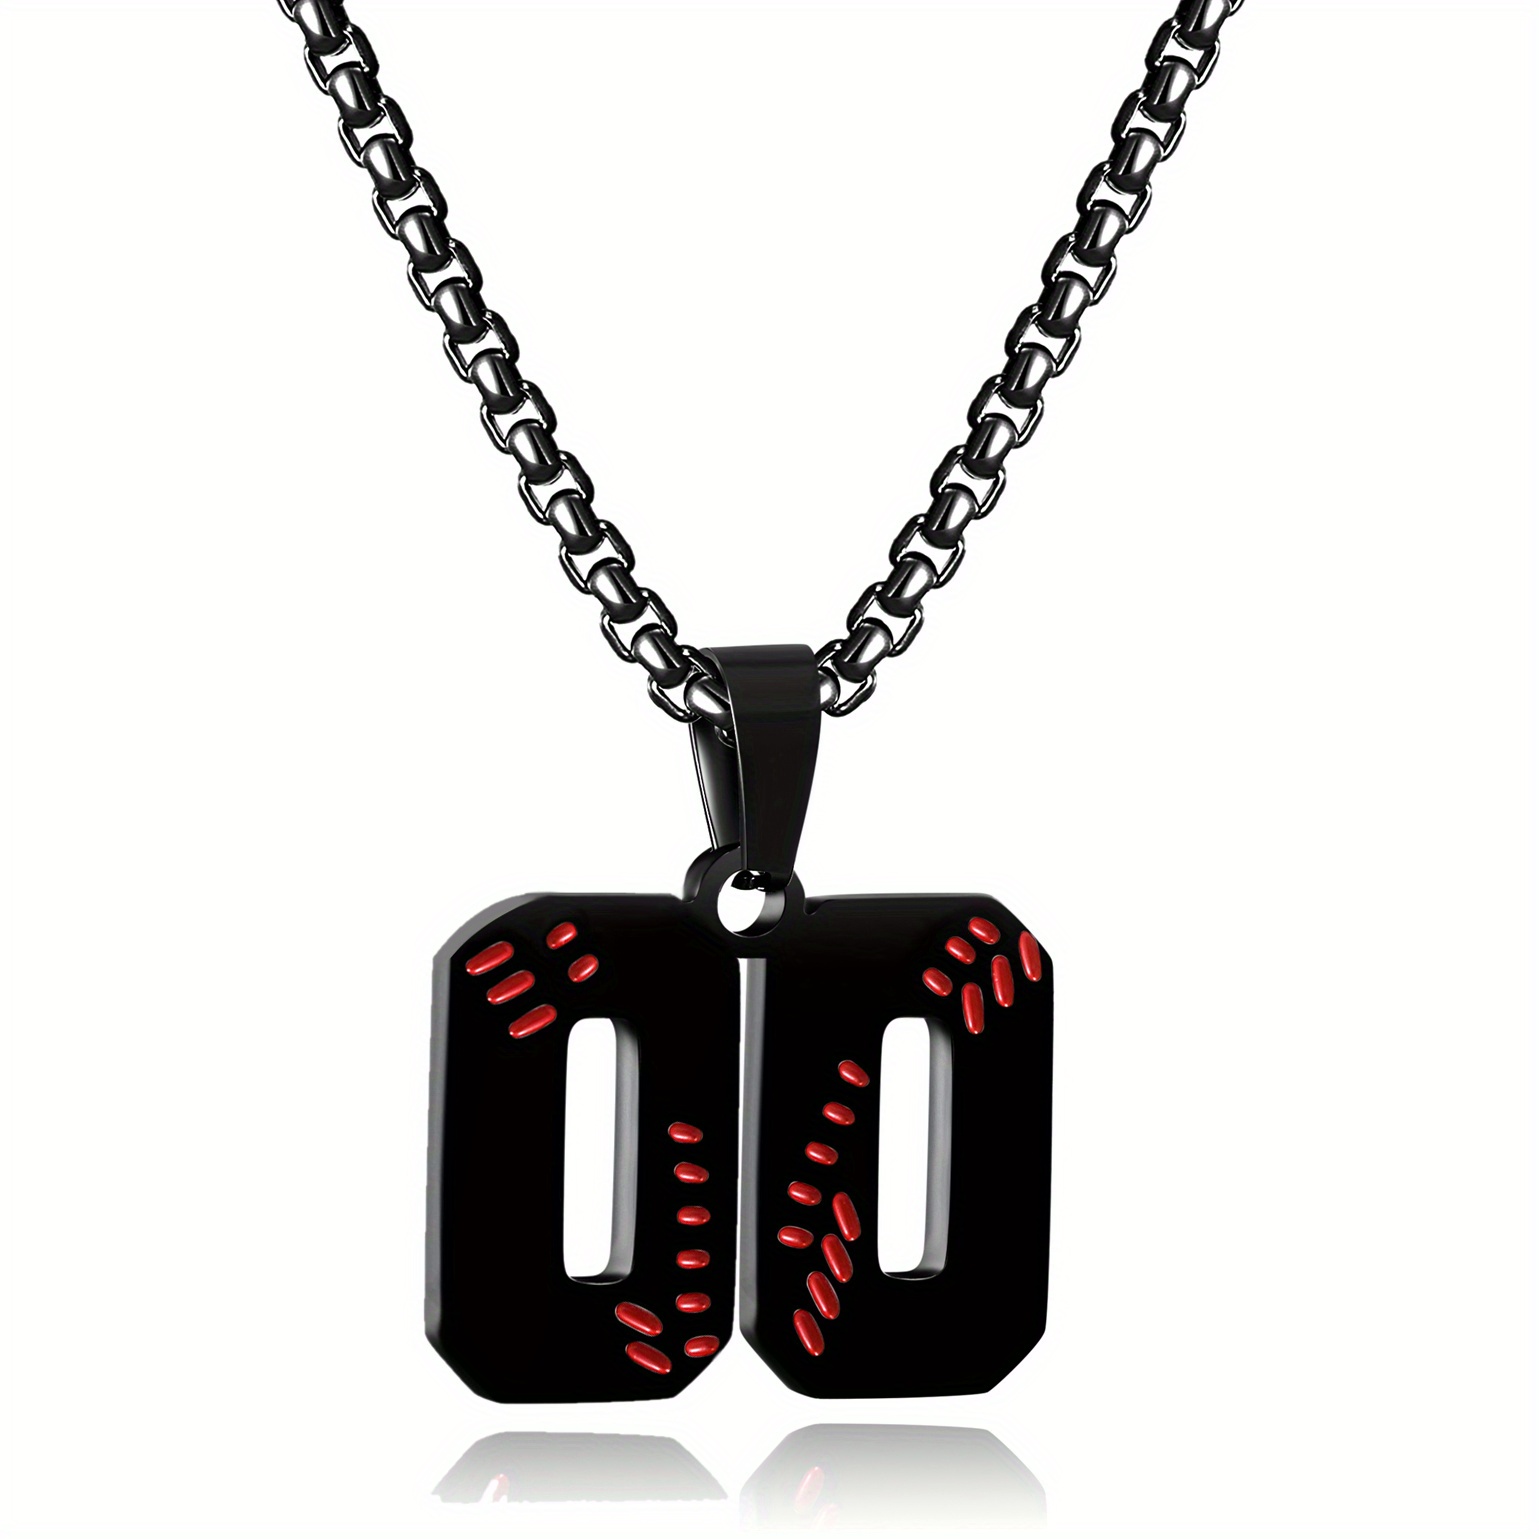 Necklace Worn by Baseball Players Red / Black / White